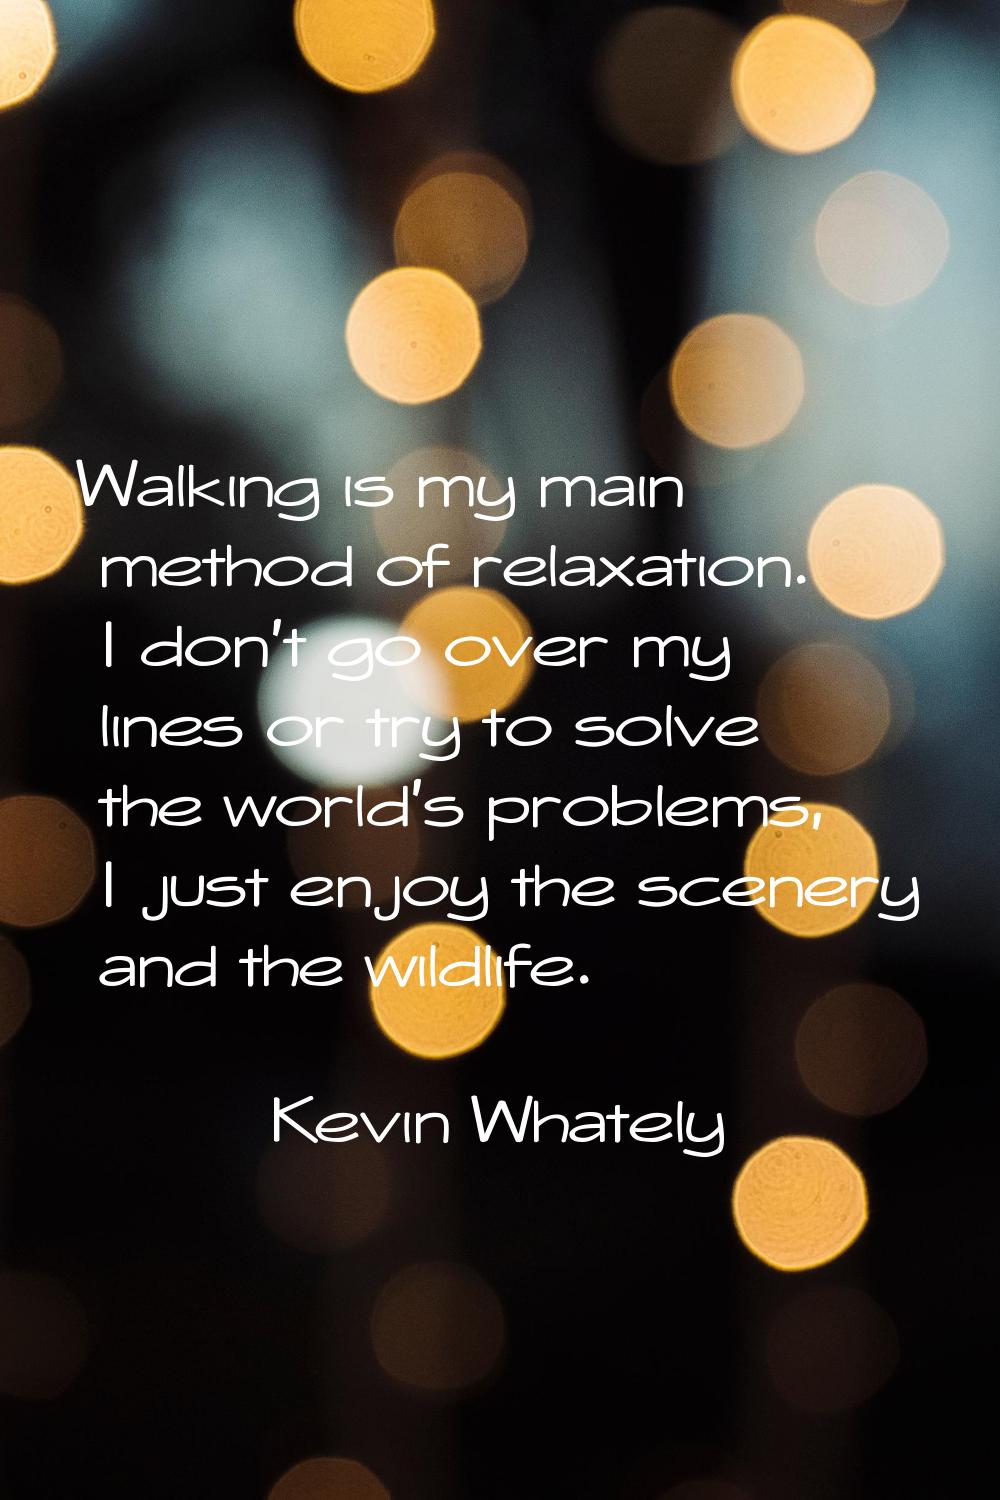 Walking is my main method of relaxation. I don't go over my lines or try to solve the world's probl